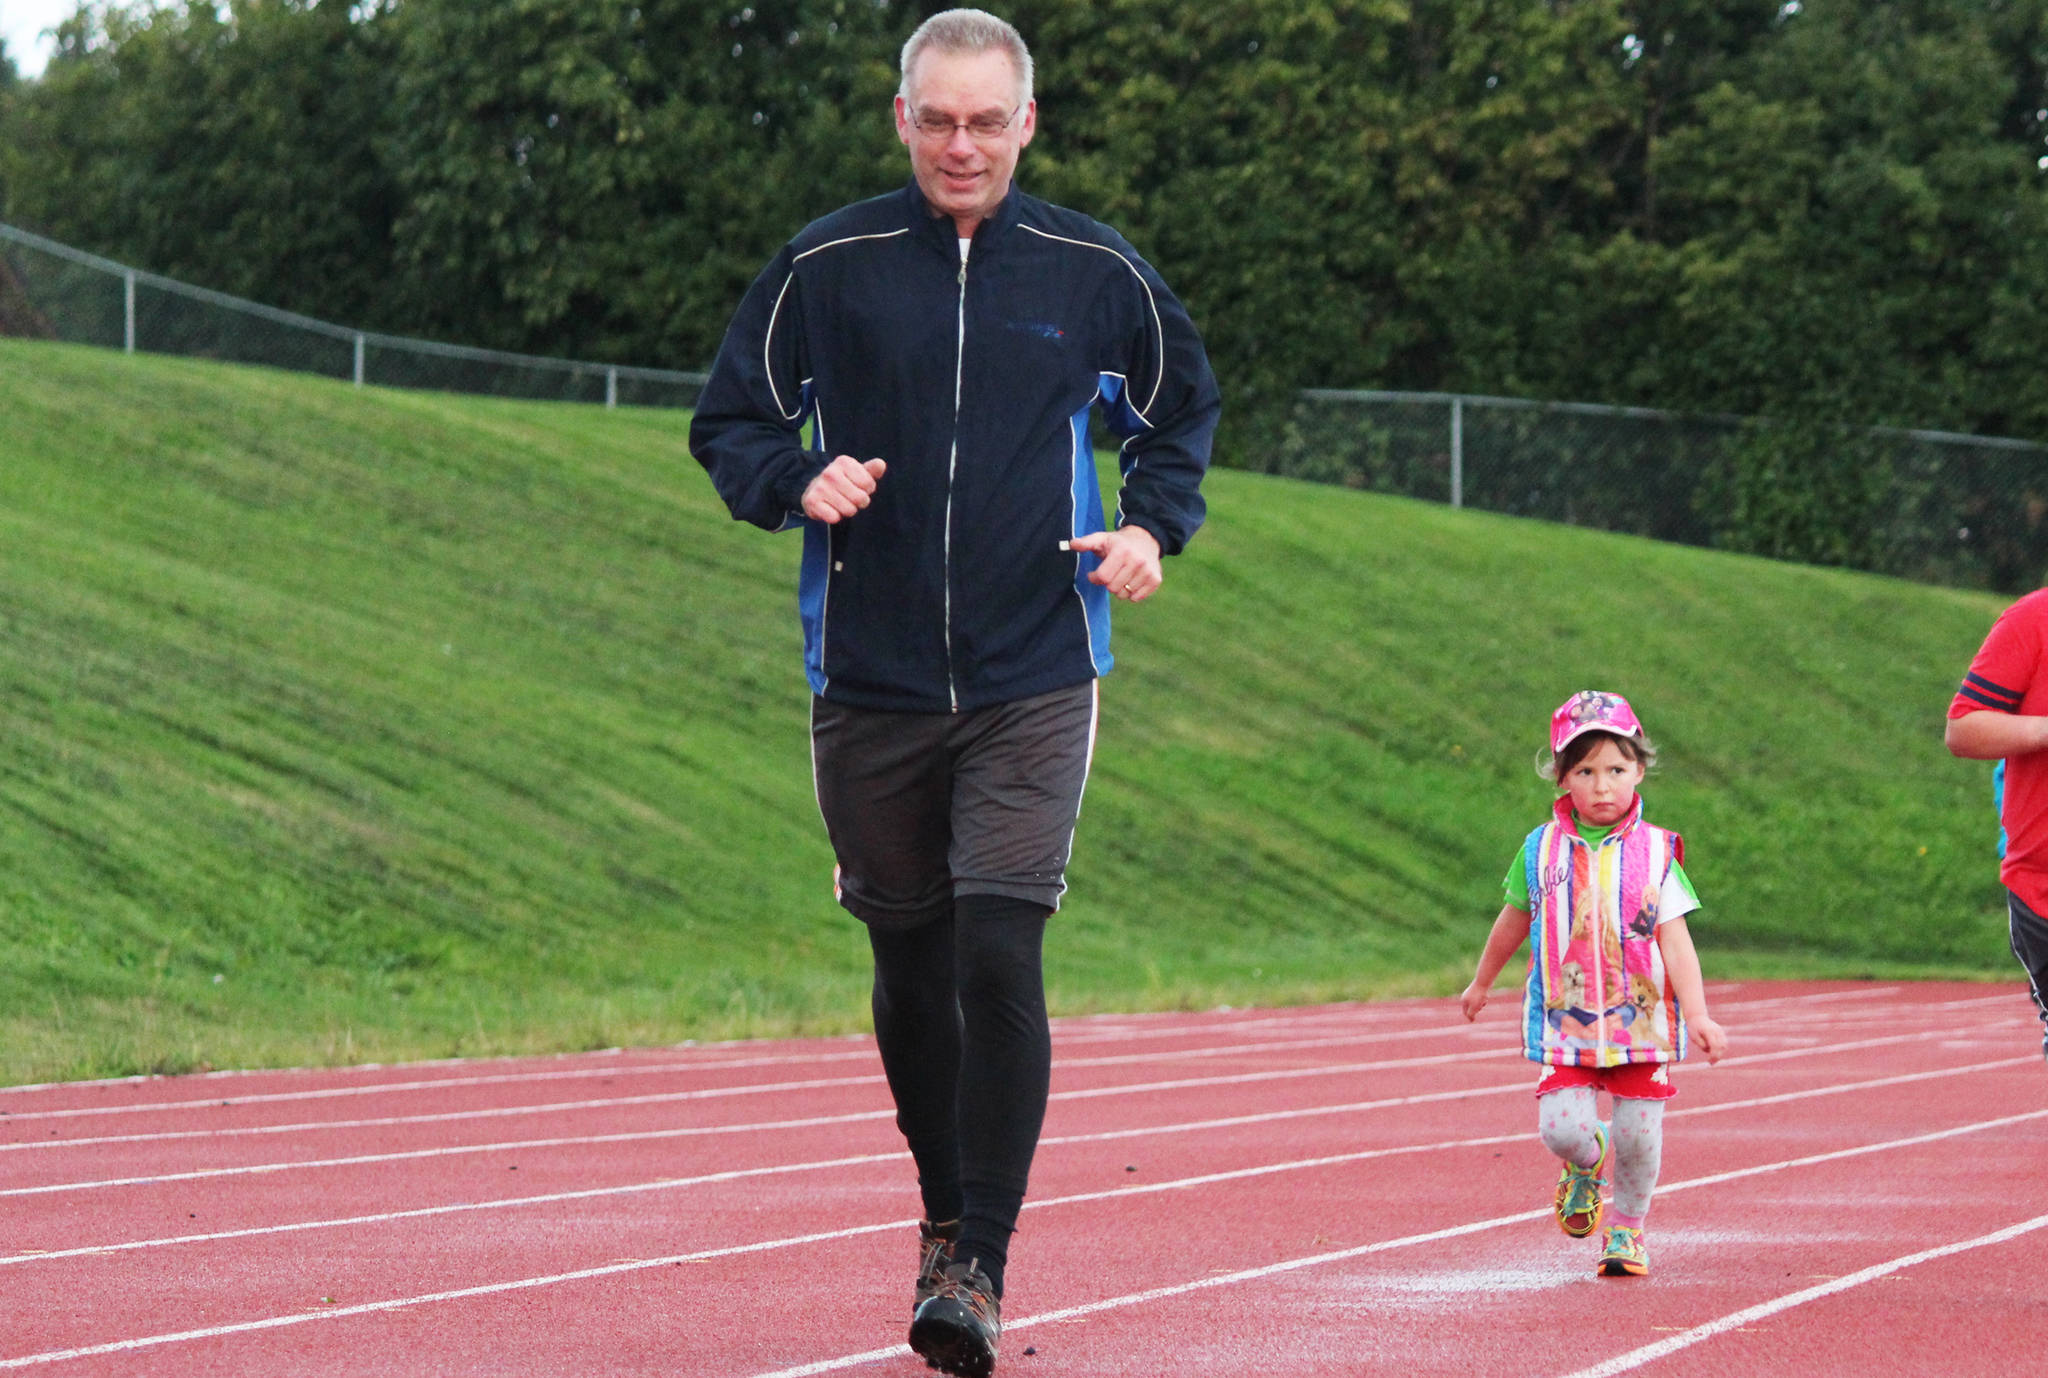 Robert Green runs with his daughter, 4-year-old Miranda Green, during the Mariner Mile fundraising event Thursday, Sept. 14, 2017 at the Homer High School track in Homer, Alaska. Participants signed up to run one mile around the track in different heats, with proceeds going to the Kachemak Bay Running Club. (Photo by Megan Pacer/Homer News)